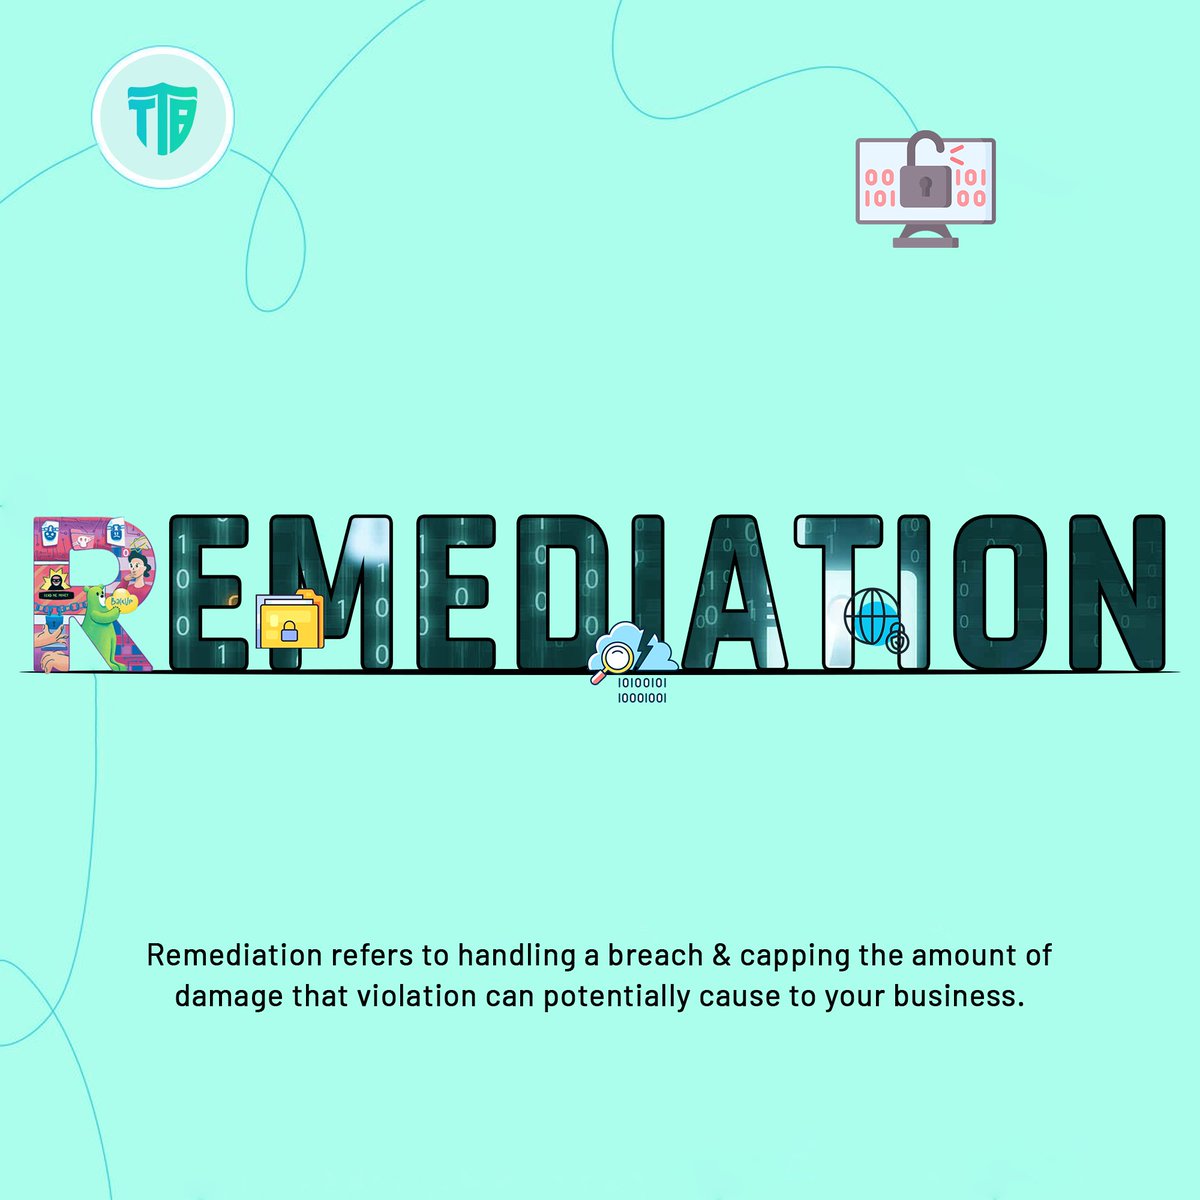 Today we discuss about 'Remediation'

Remediation is the method of specifying & handling cyber threats that can affect your business and web safety.

#Remediation #CyberRemediation #InfoSec #ttbinternetsecurity #DataProtection #CyberResilience #ttb #RiskMitigation #ttbantivirus